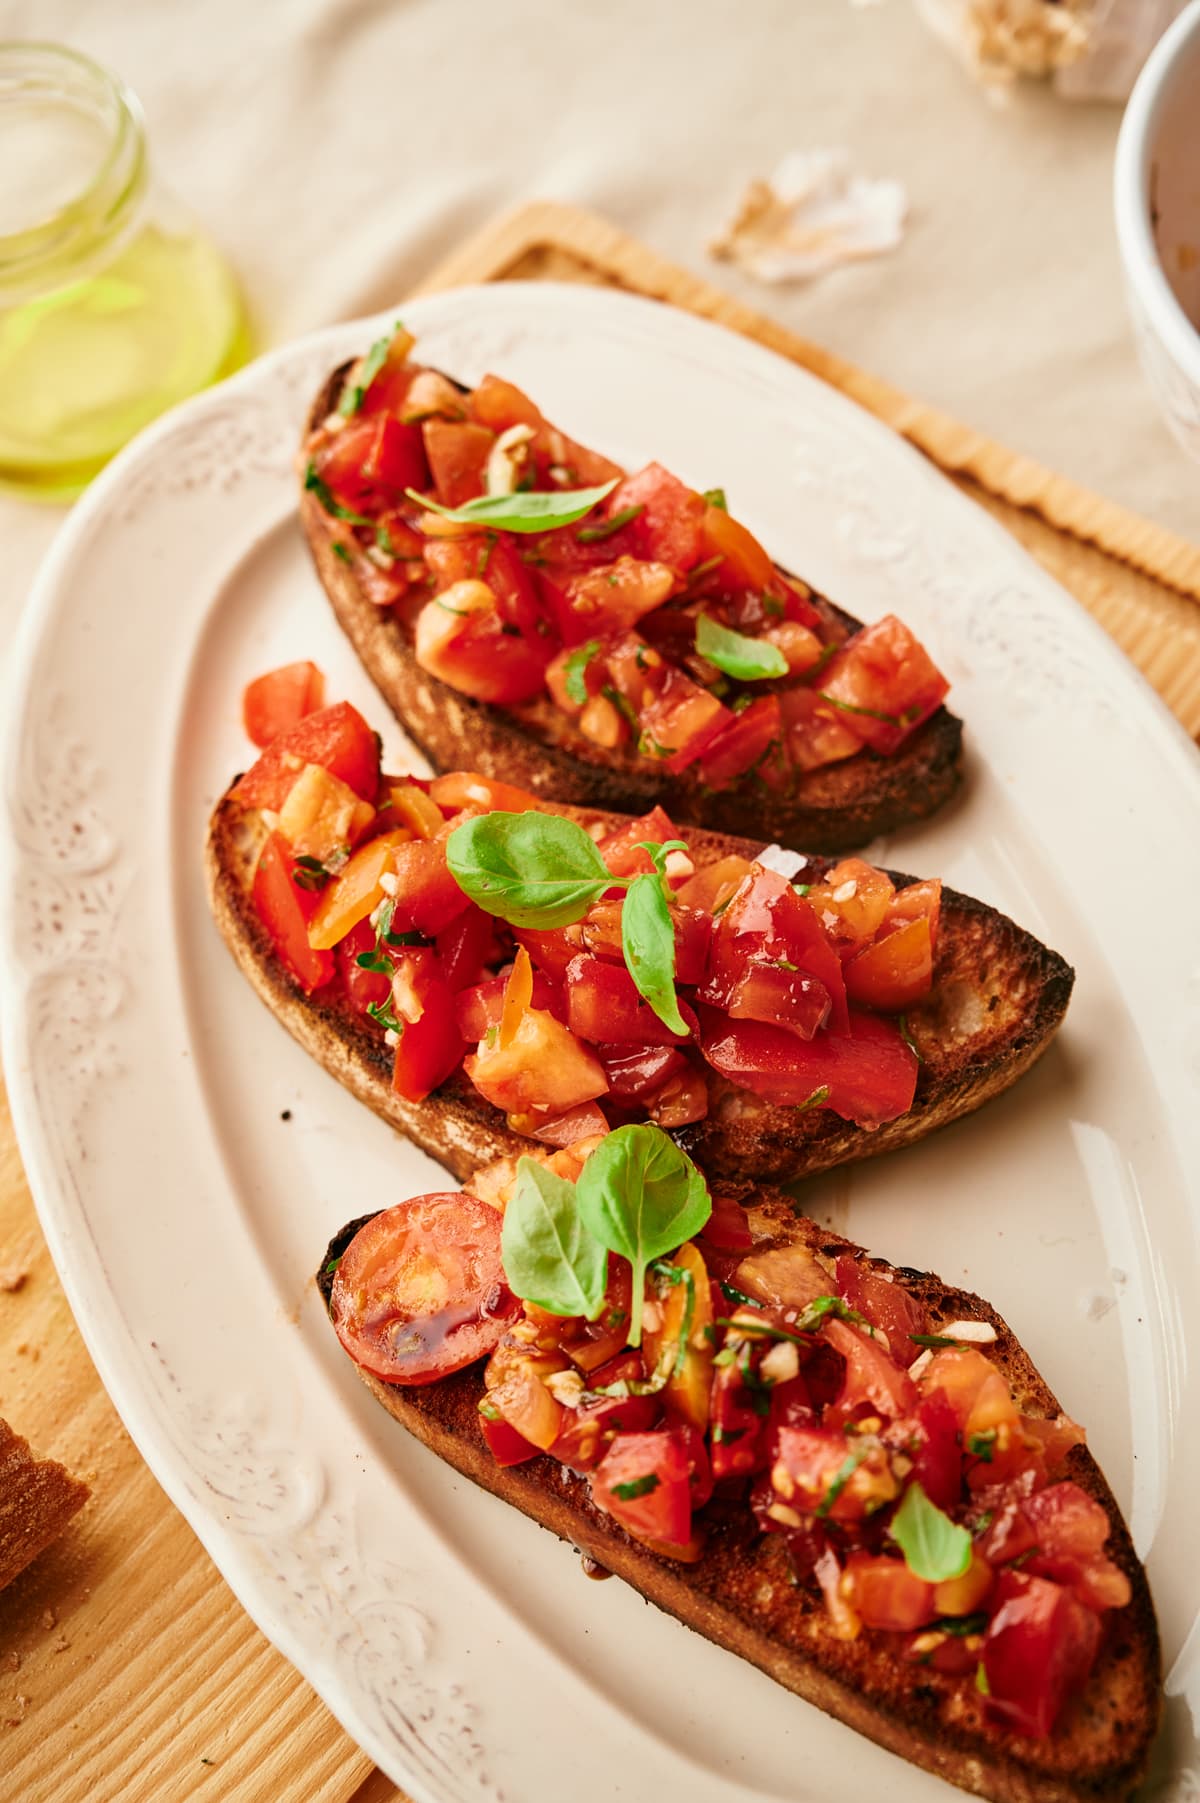 three pieces of toasted bread with diced fresh tomatoes, olive oil and garlic on top, on a serving plate